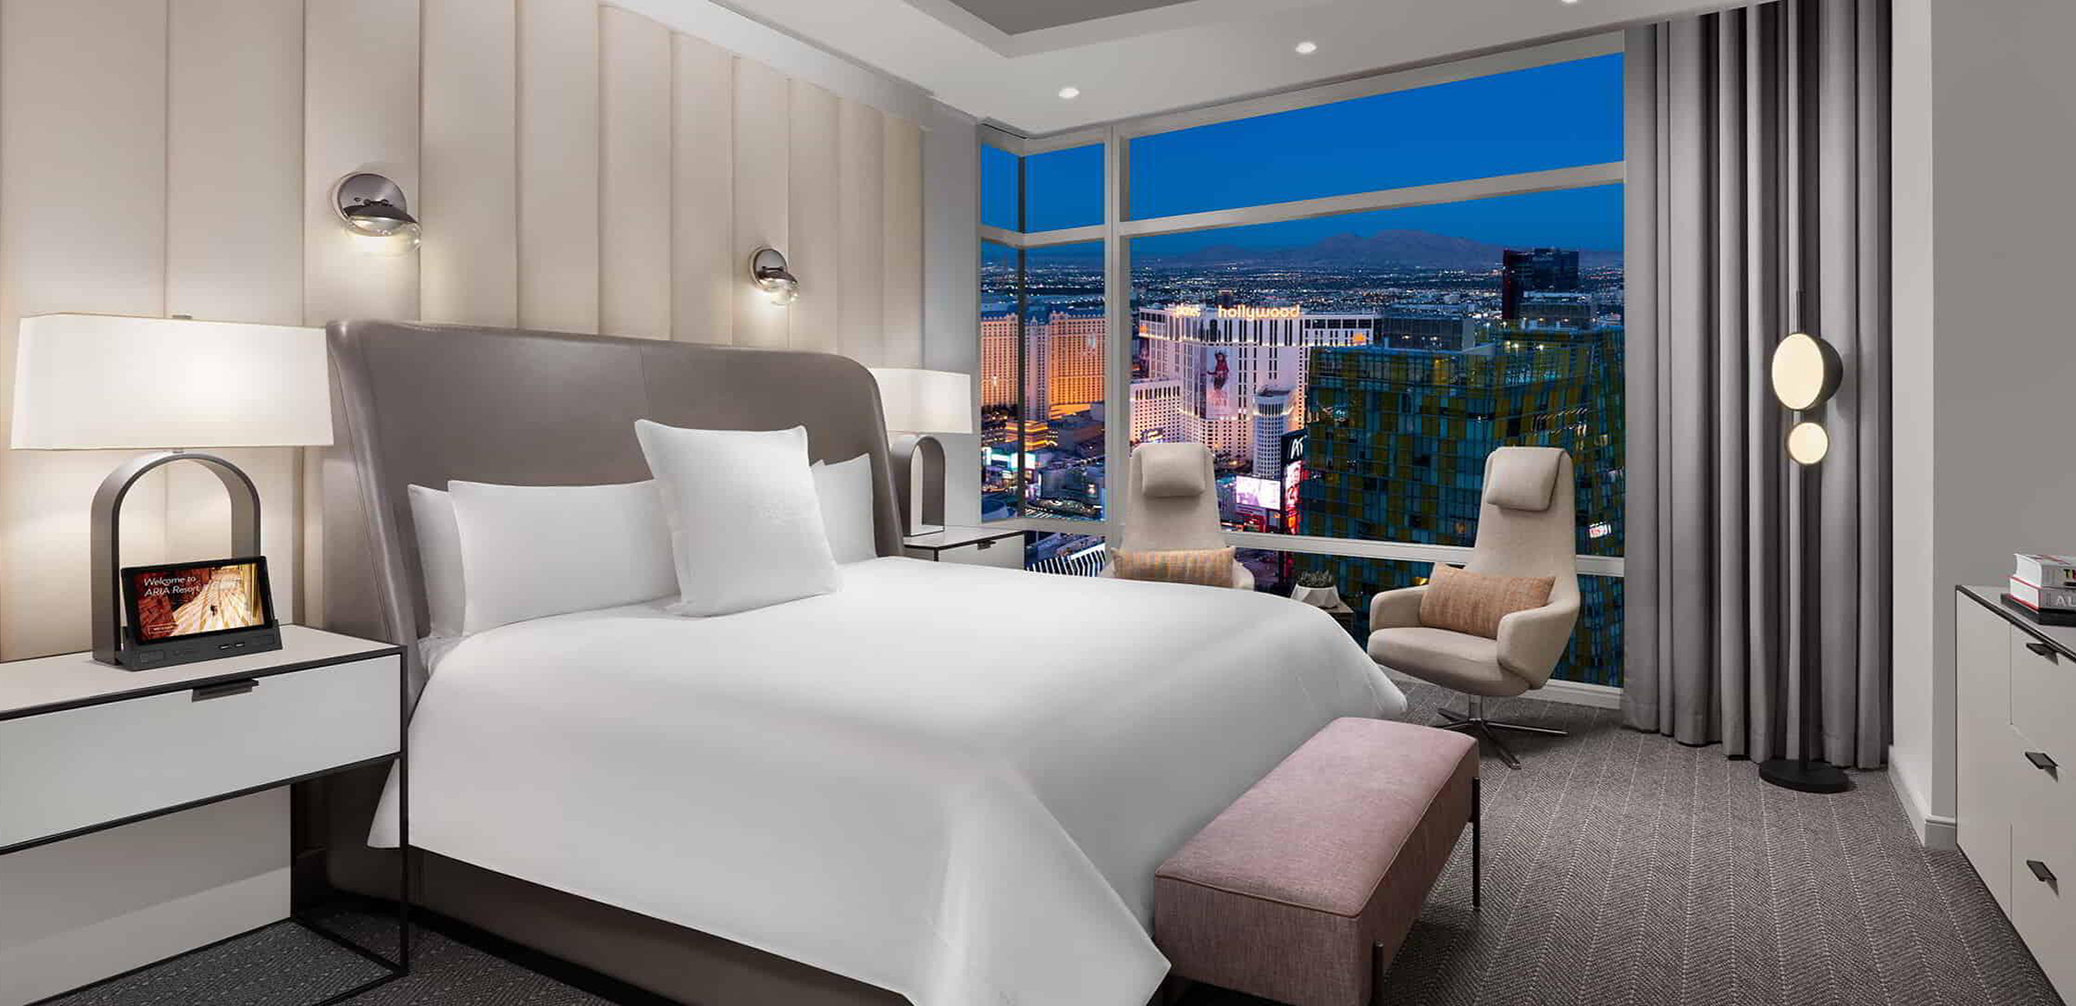 10 Tips For Getting A Late Checkout At Aria Resort & Casino, Las Vegas